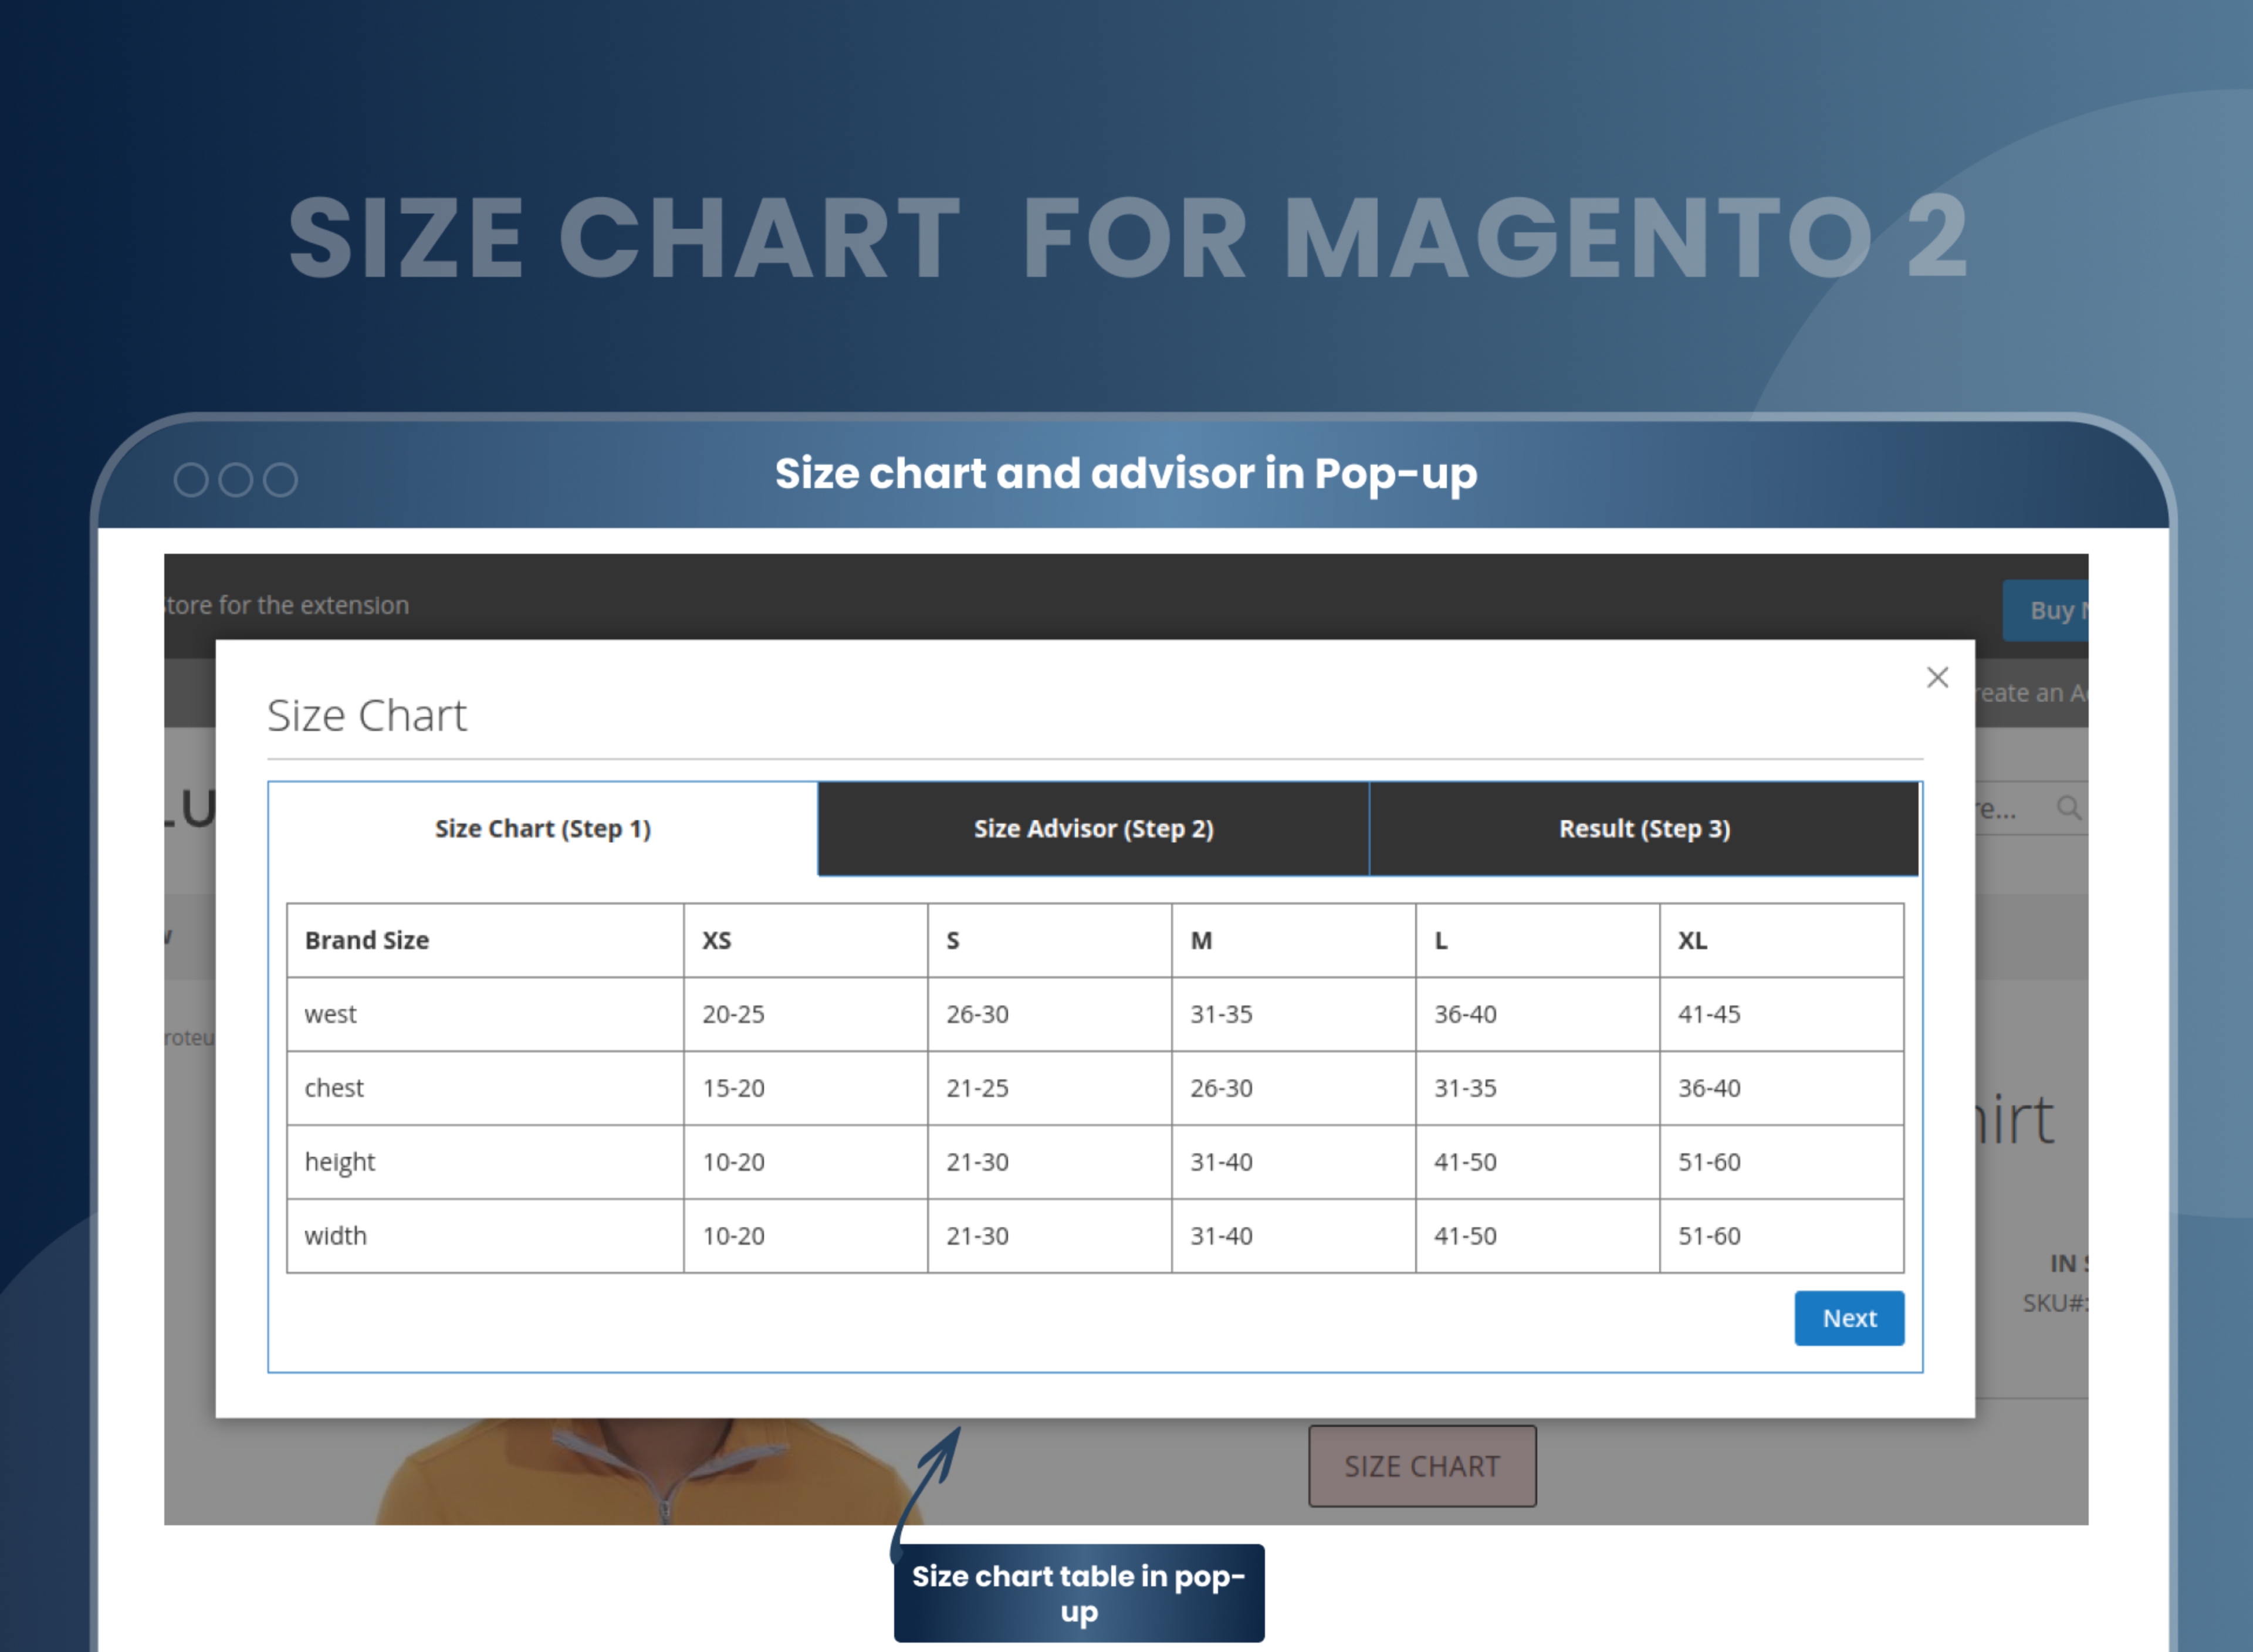 Size chart and advisor in Pop-up